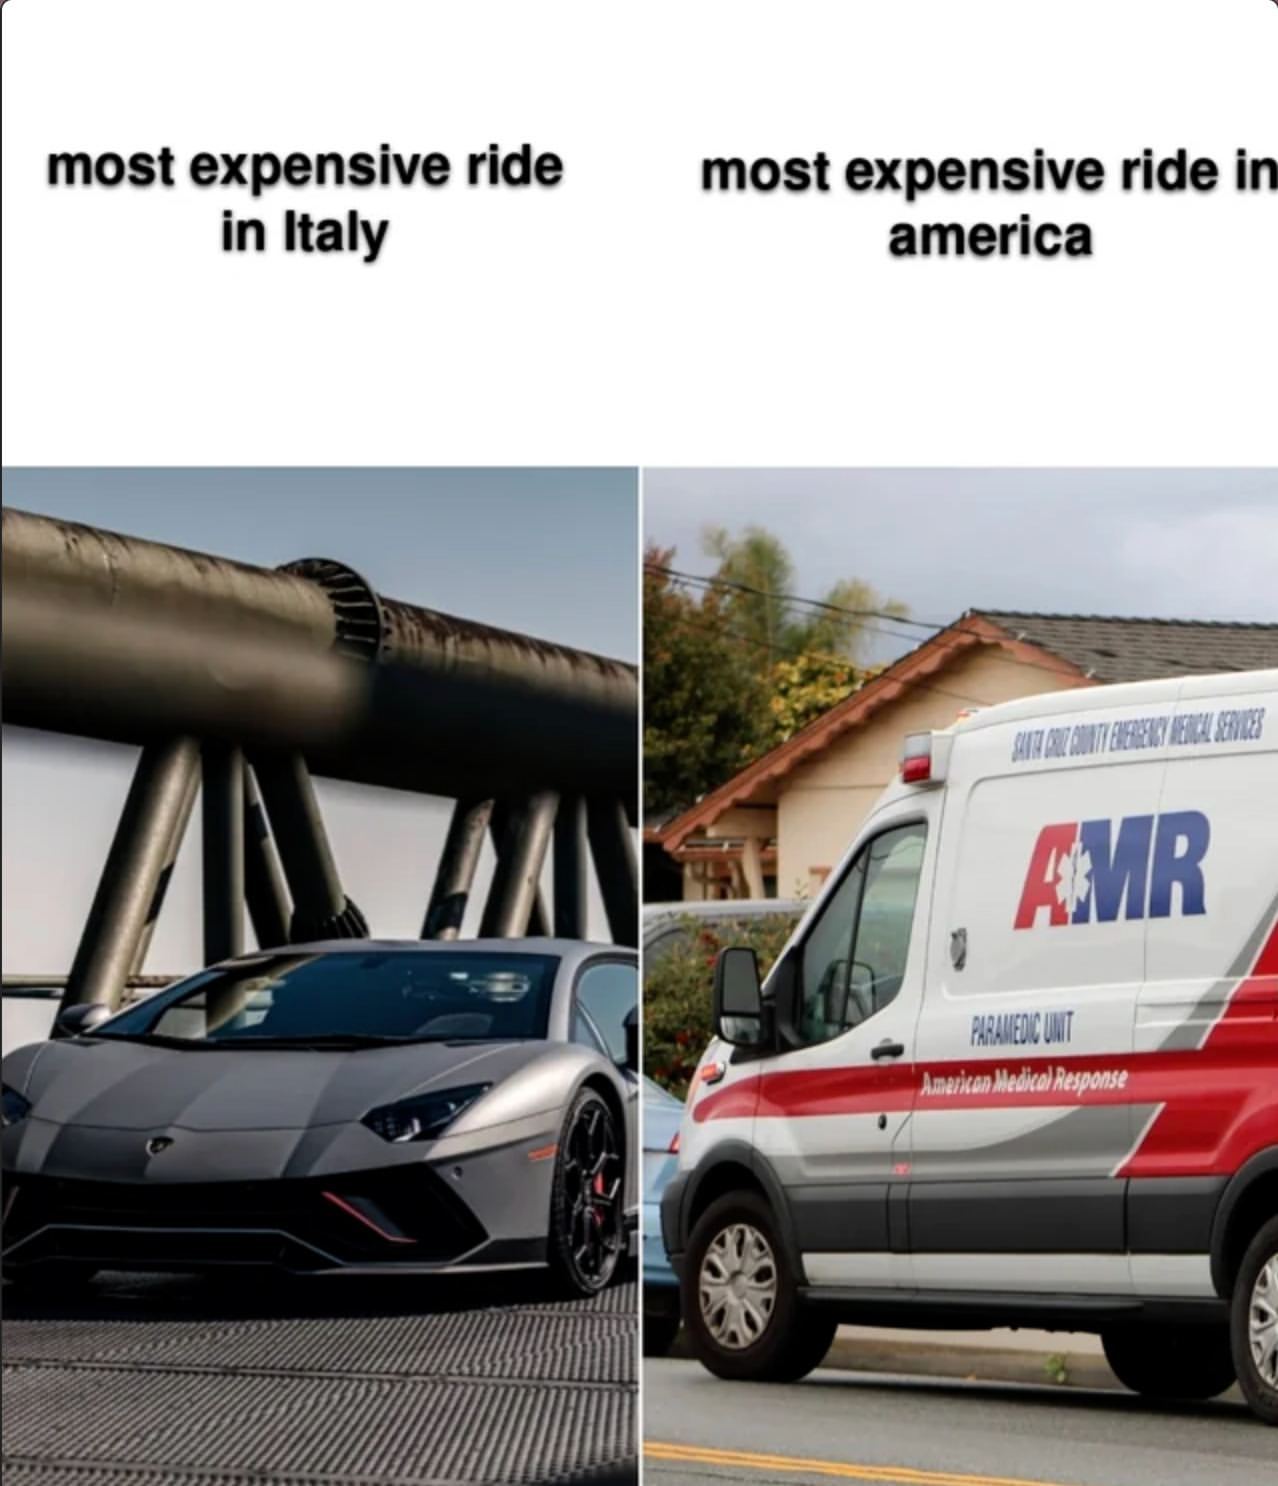 Most expensive ride in Italy. Most expensive ride in America.